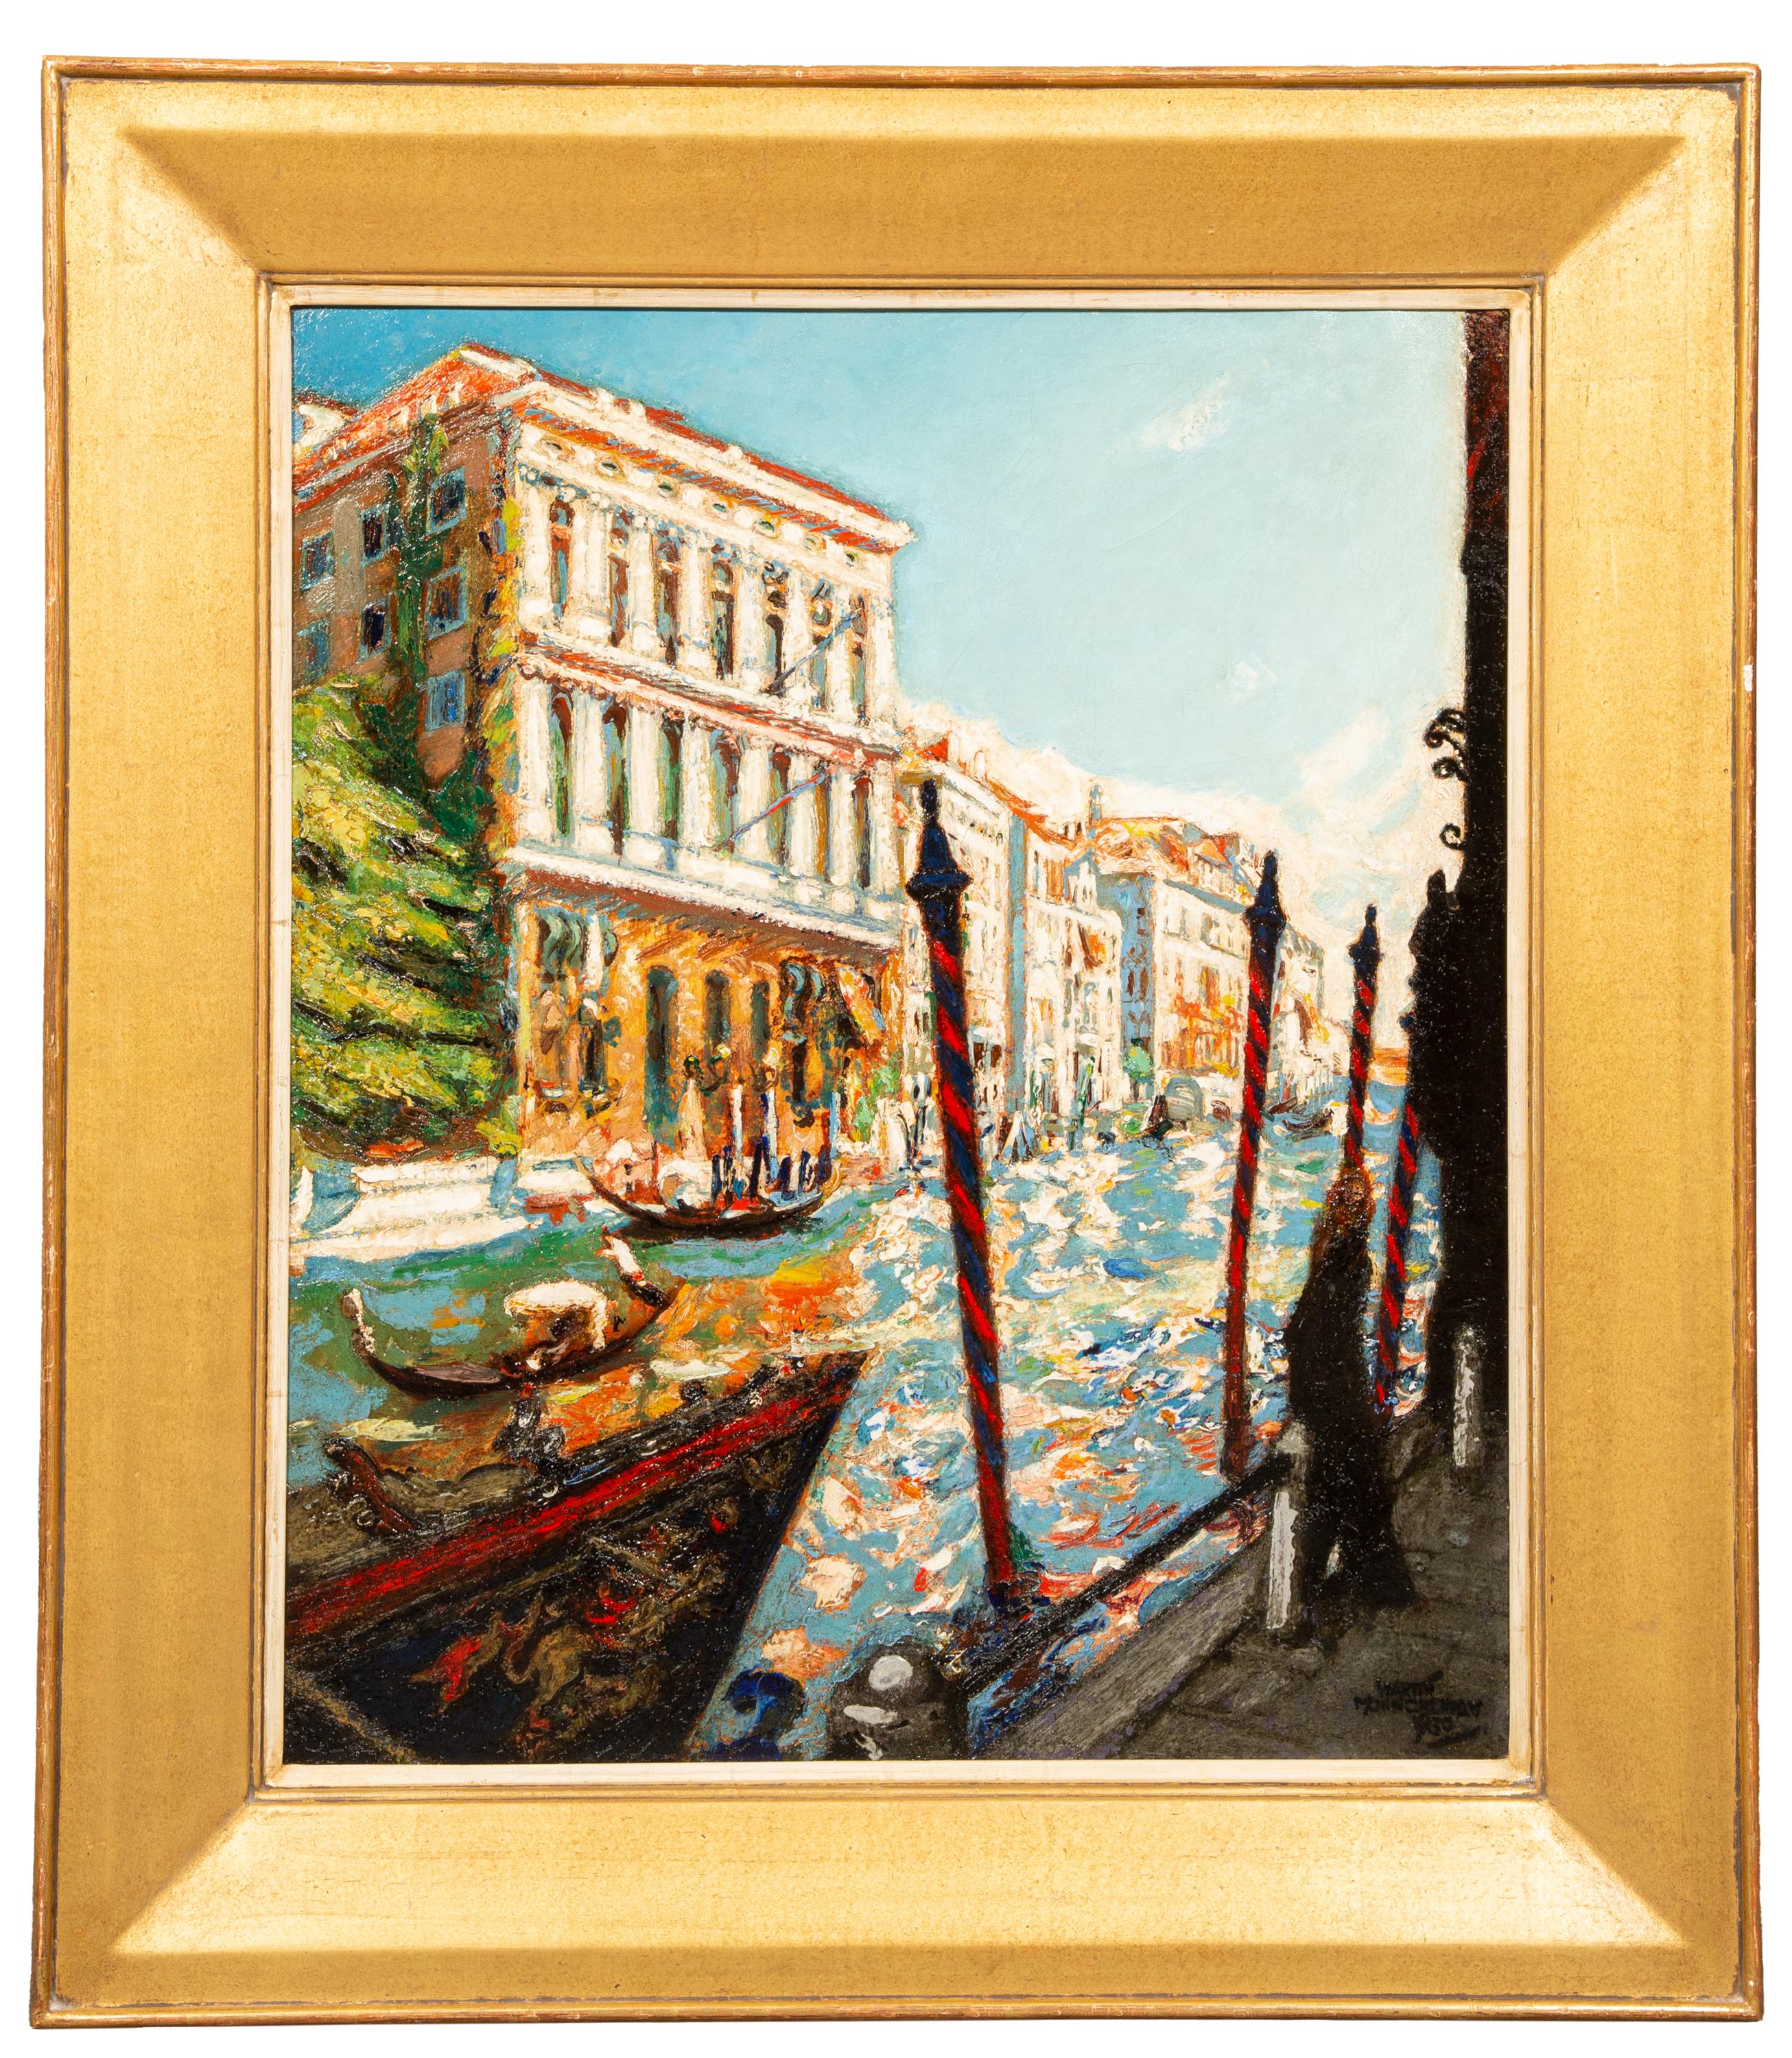 Martin Monnickendam
1874 – Amsterdam – 1943
Dutch Painter

‘Canal Grande in Venice’

Signature: signed lower right and dated 'Martin Monninckendam 1930' 
Medium: oil on canvas
 Dimensions: image size 70 x 59 cm, frame size 91 x 78,5